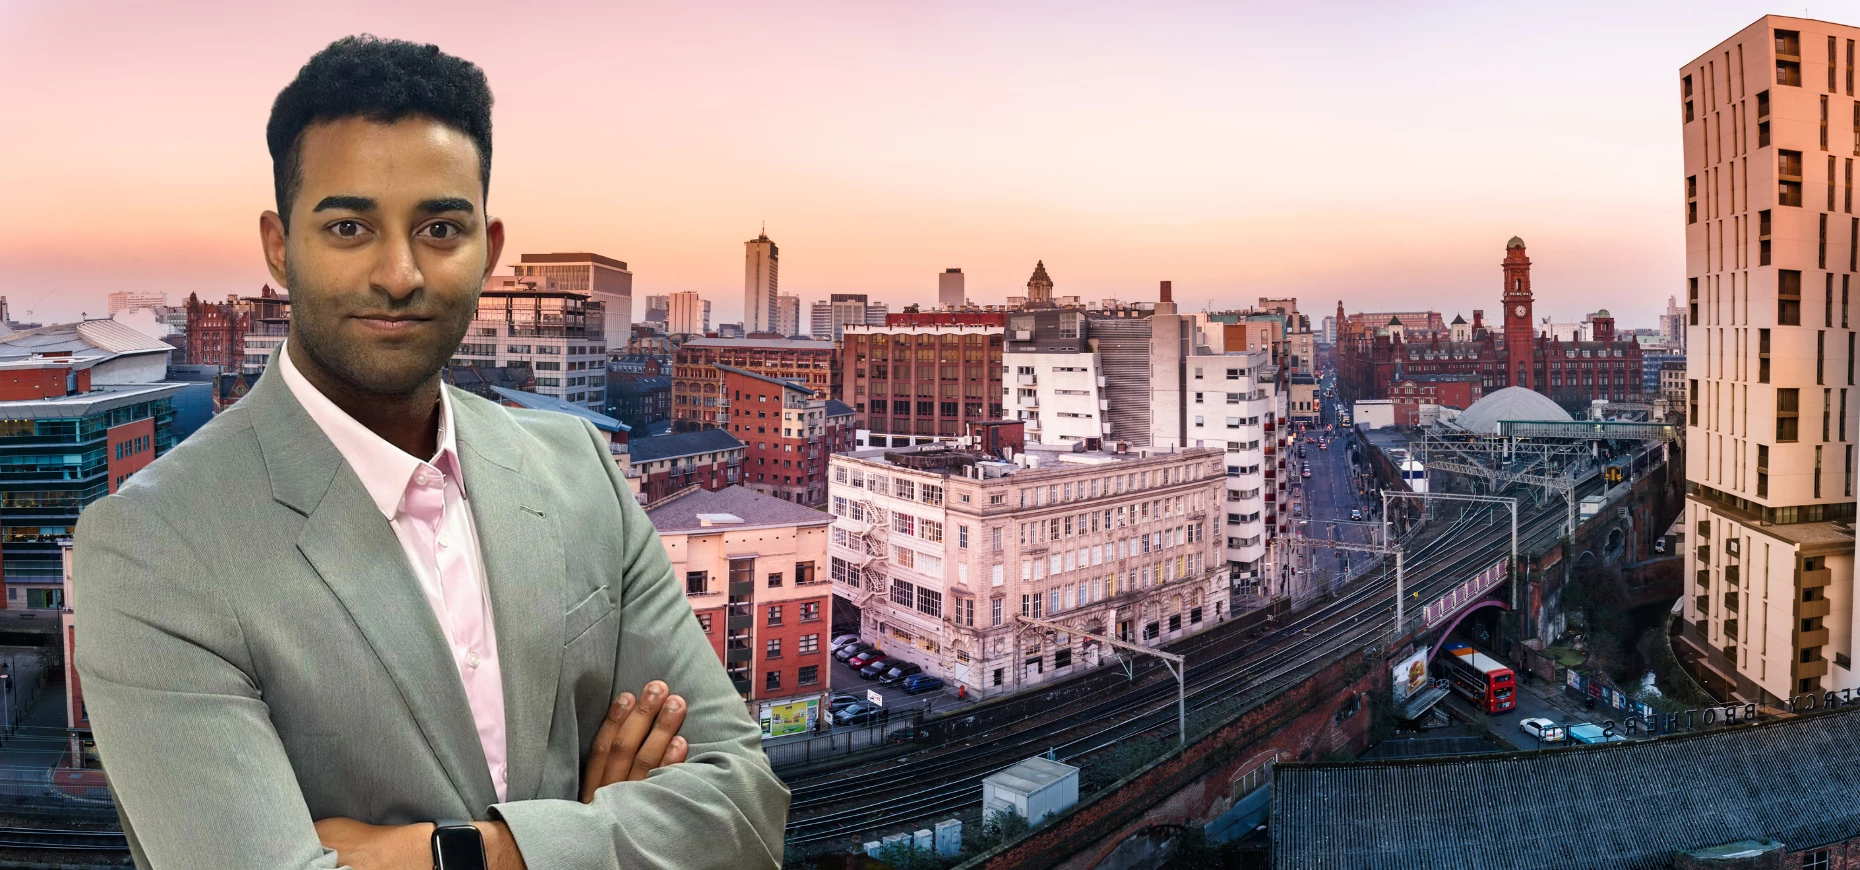 Mohamed Hamza, Senior Legal Consultant at The City Recruiter, stands in front of the Manchester skyline.